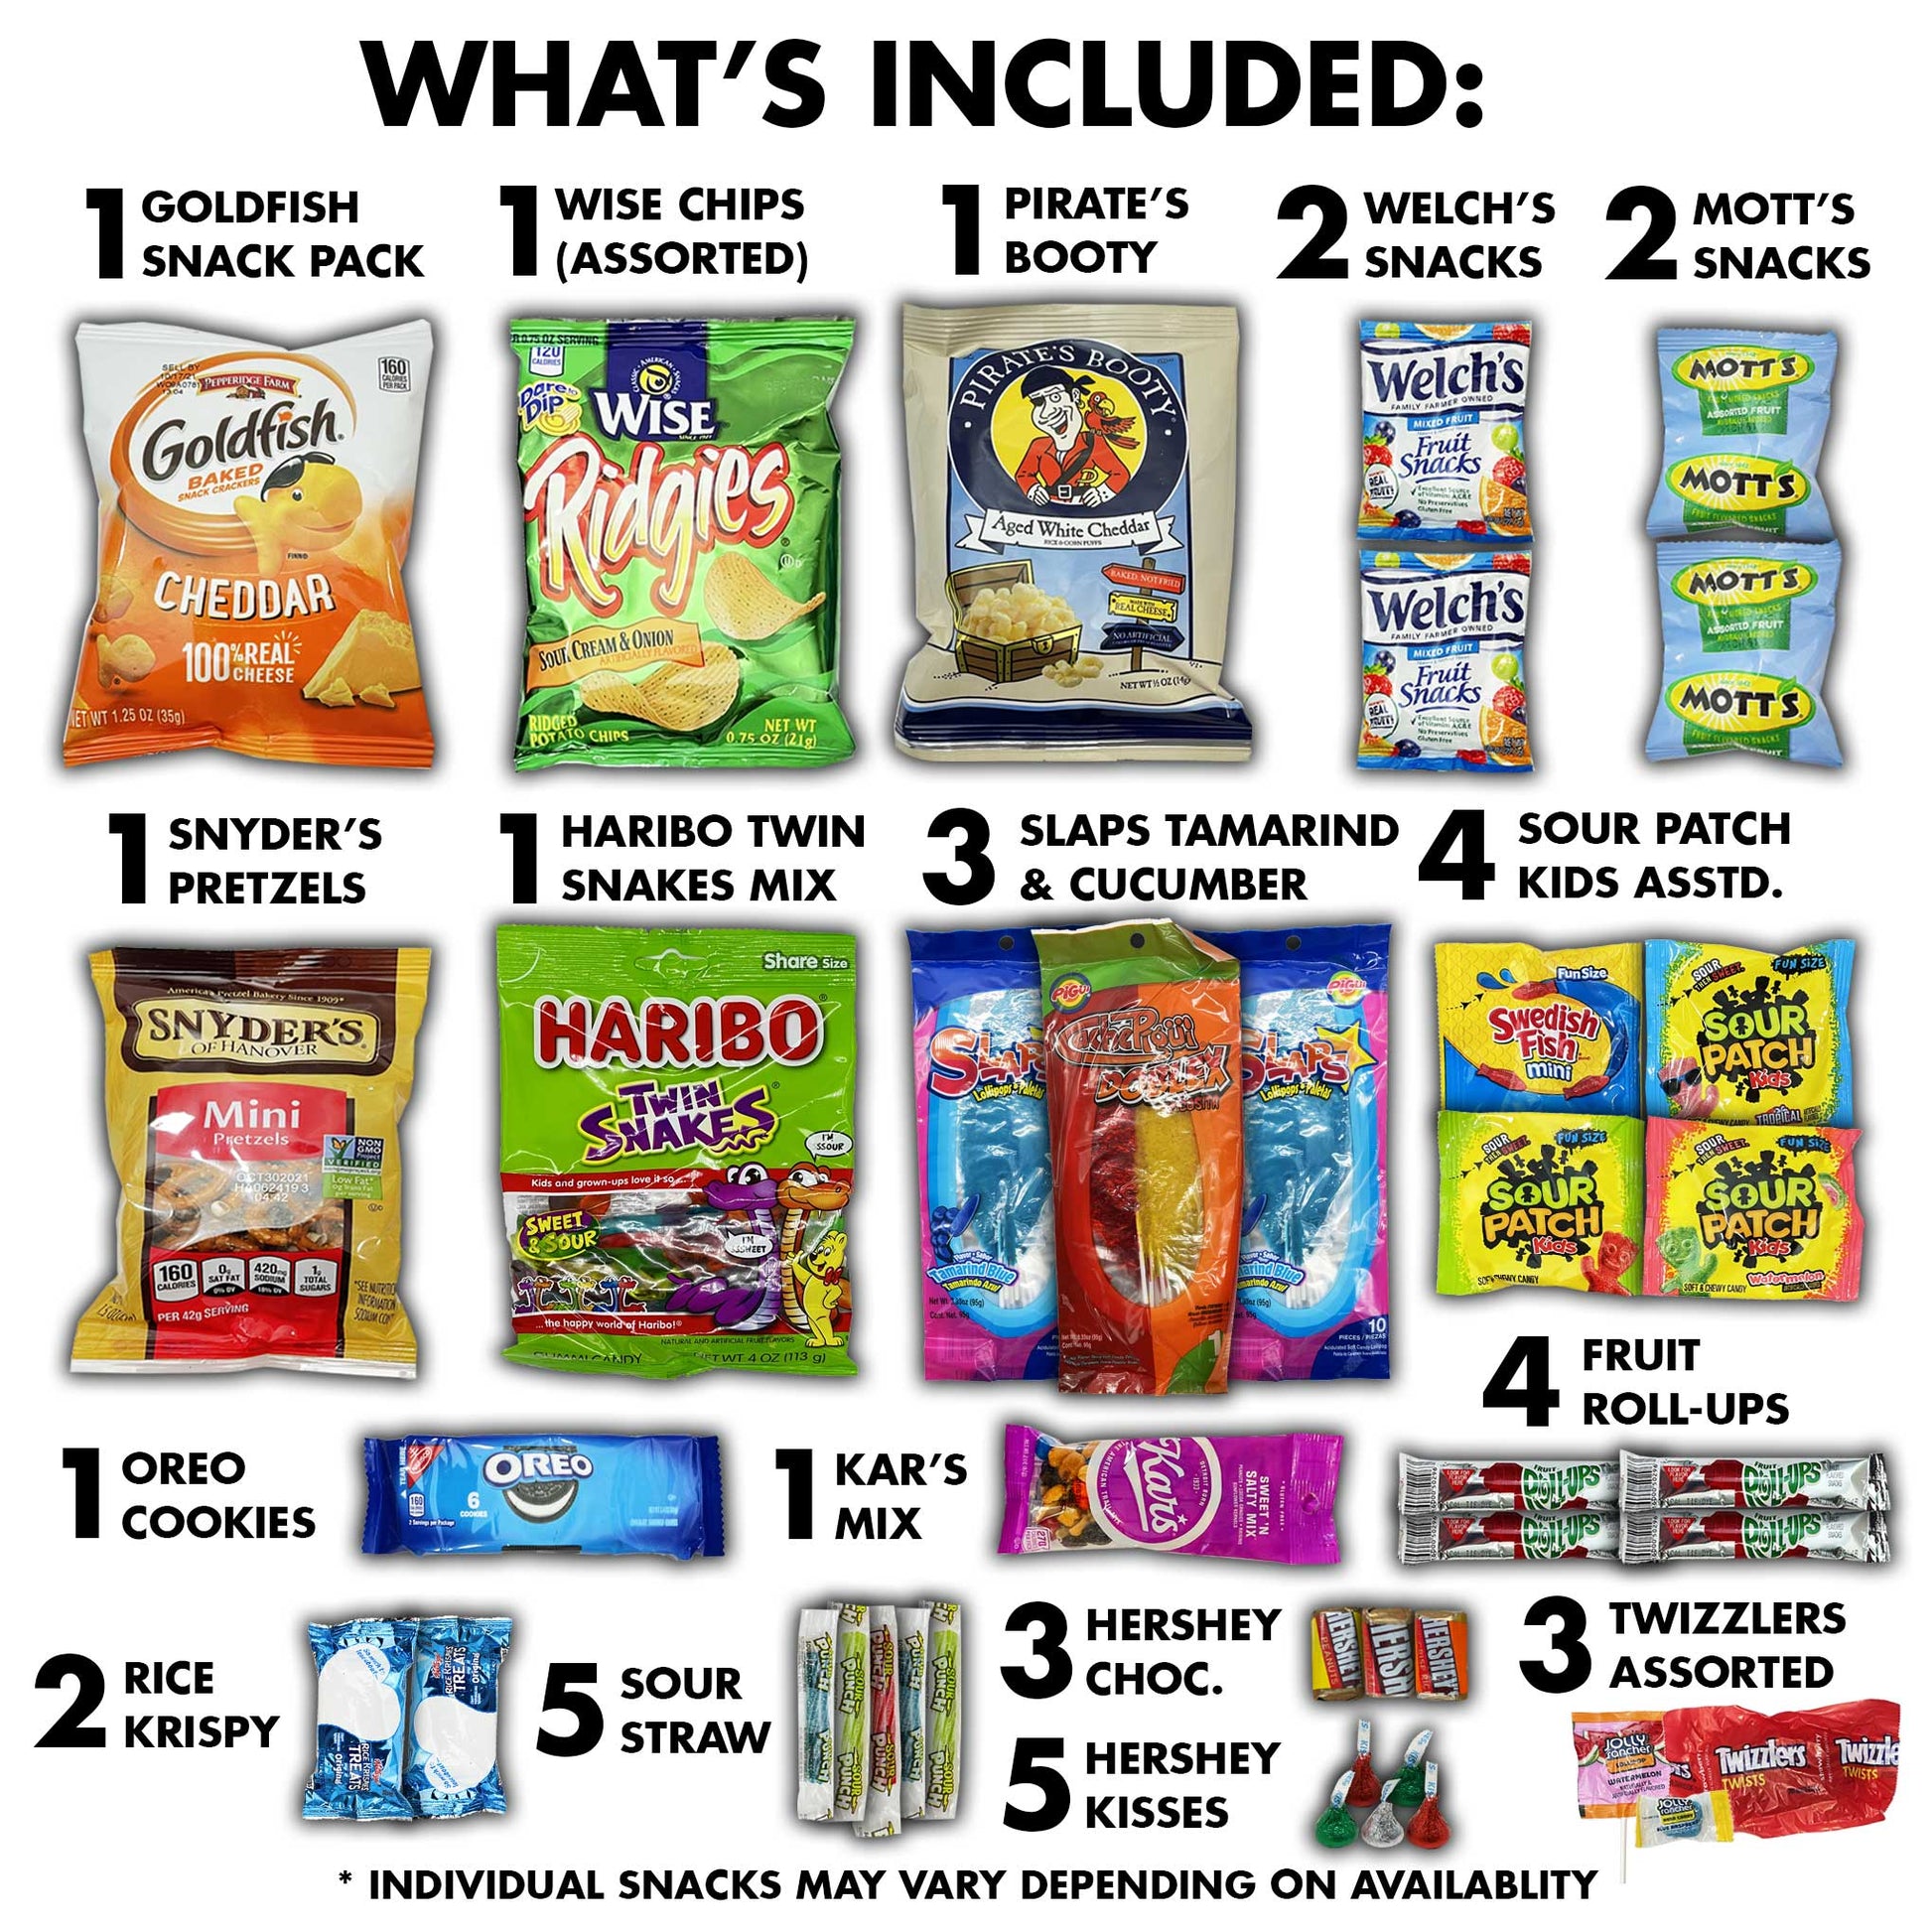 Goldfish, Wise Chips, Pirates Booty, Welch's Fruit Snacks, Mott's Fruit Snacks, Snyders Pretzels Haribo Gummies, Slaps Assorted Lollipops, Sour Patch, Oreo Cooies Kar's Mix, Fruit Rollups, Rice Krispies Treats, Sour straws, Hersheys Chocolate and Tizzlers